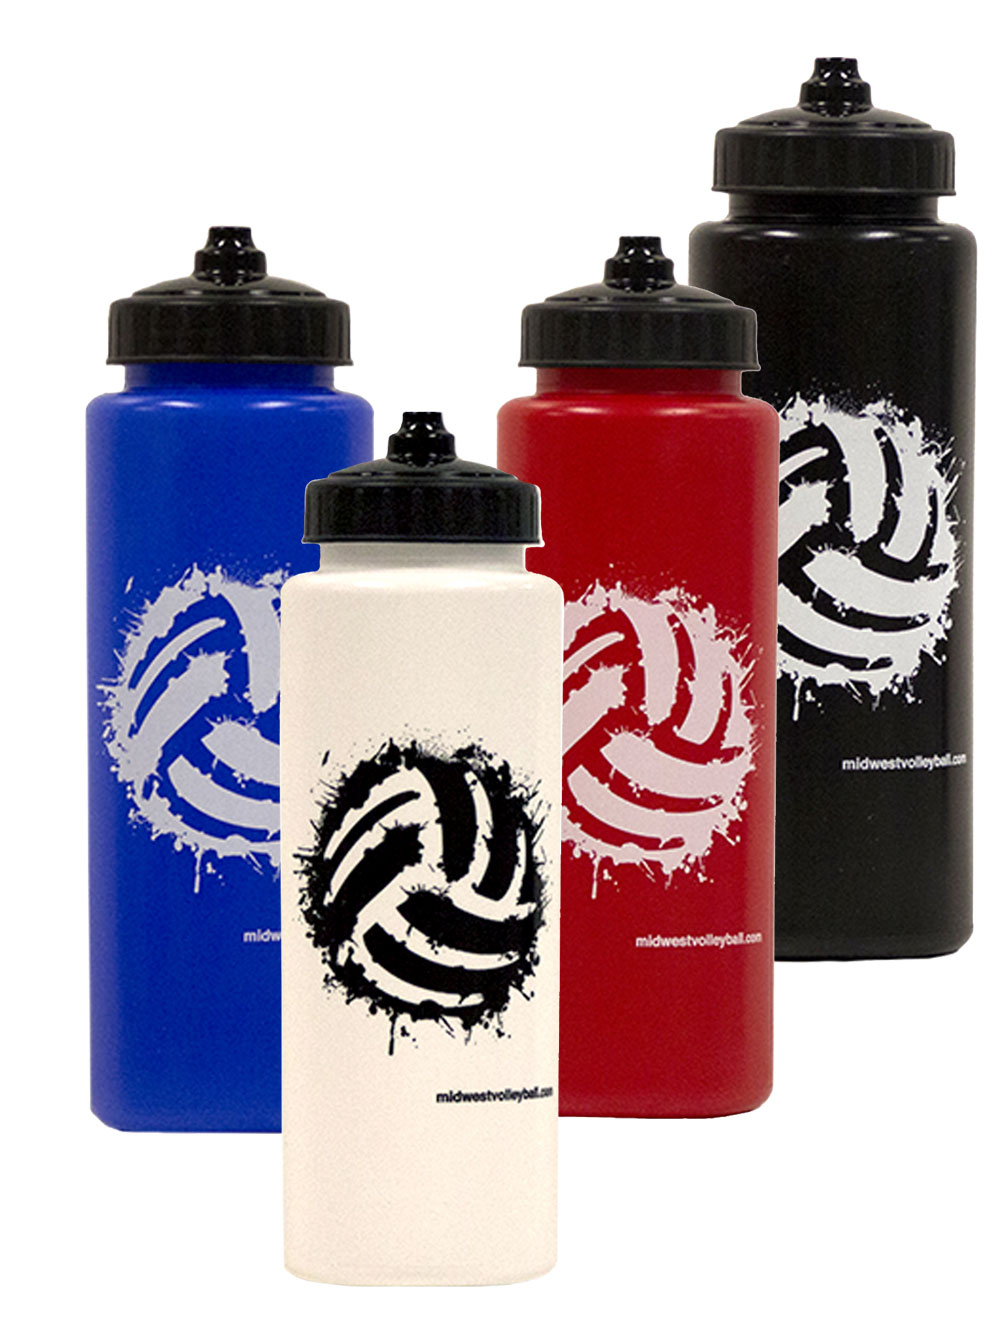 https://www.midwestvolleyball.com/store/sc_images/products/WATER.P00.jpg